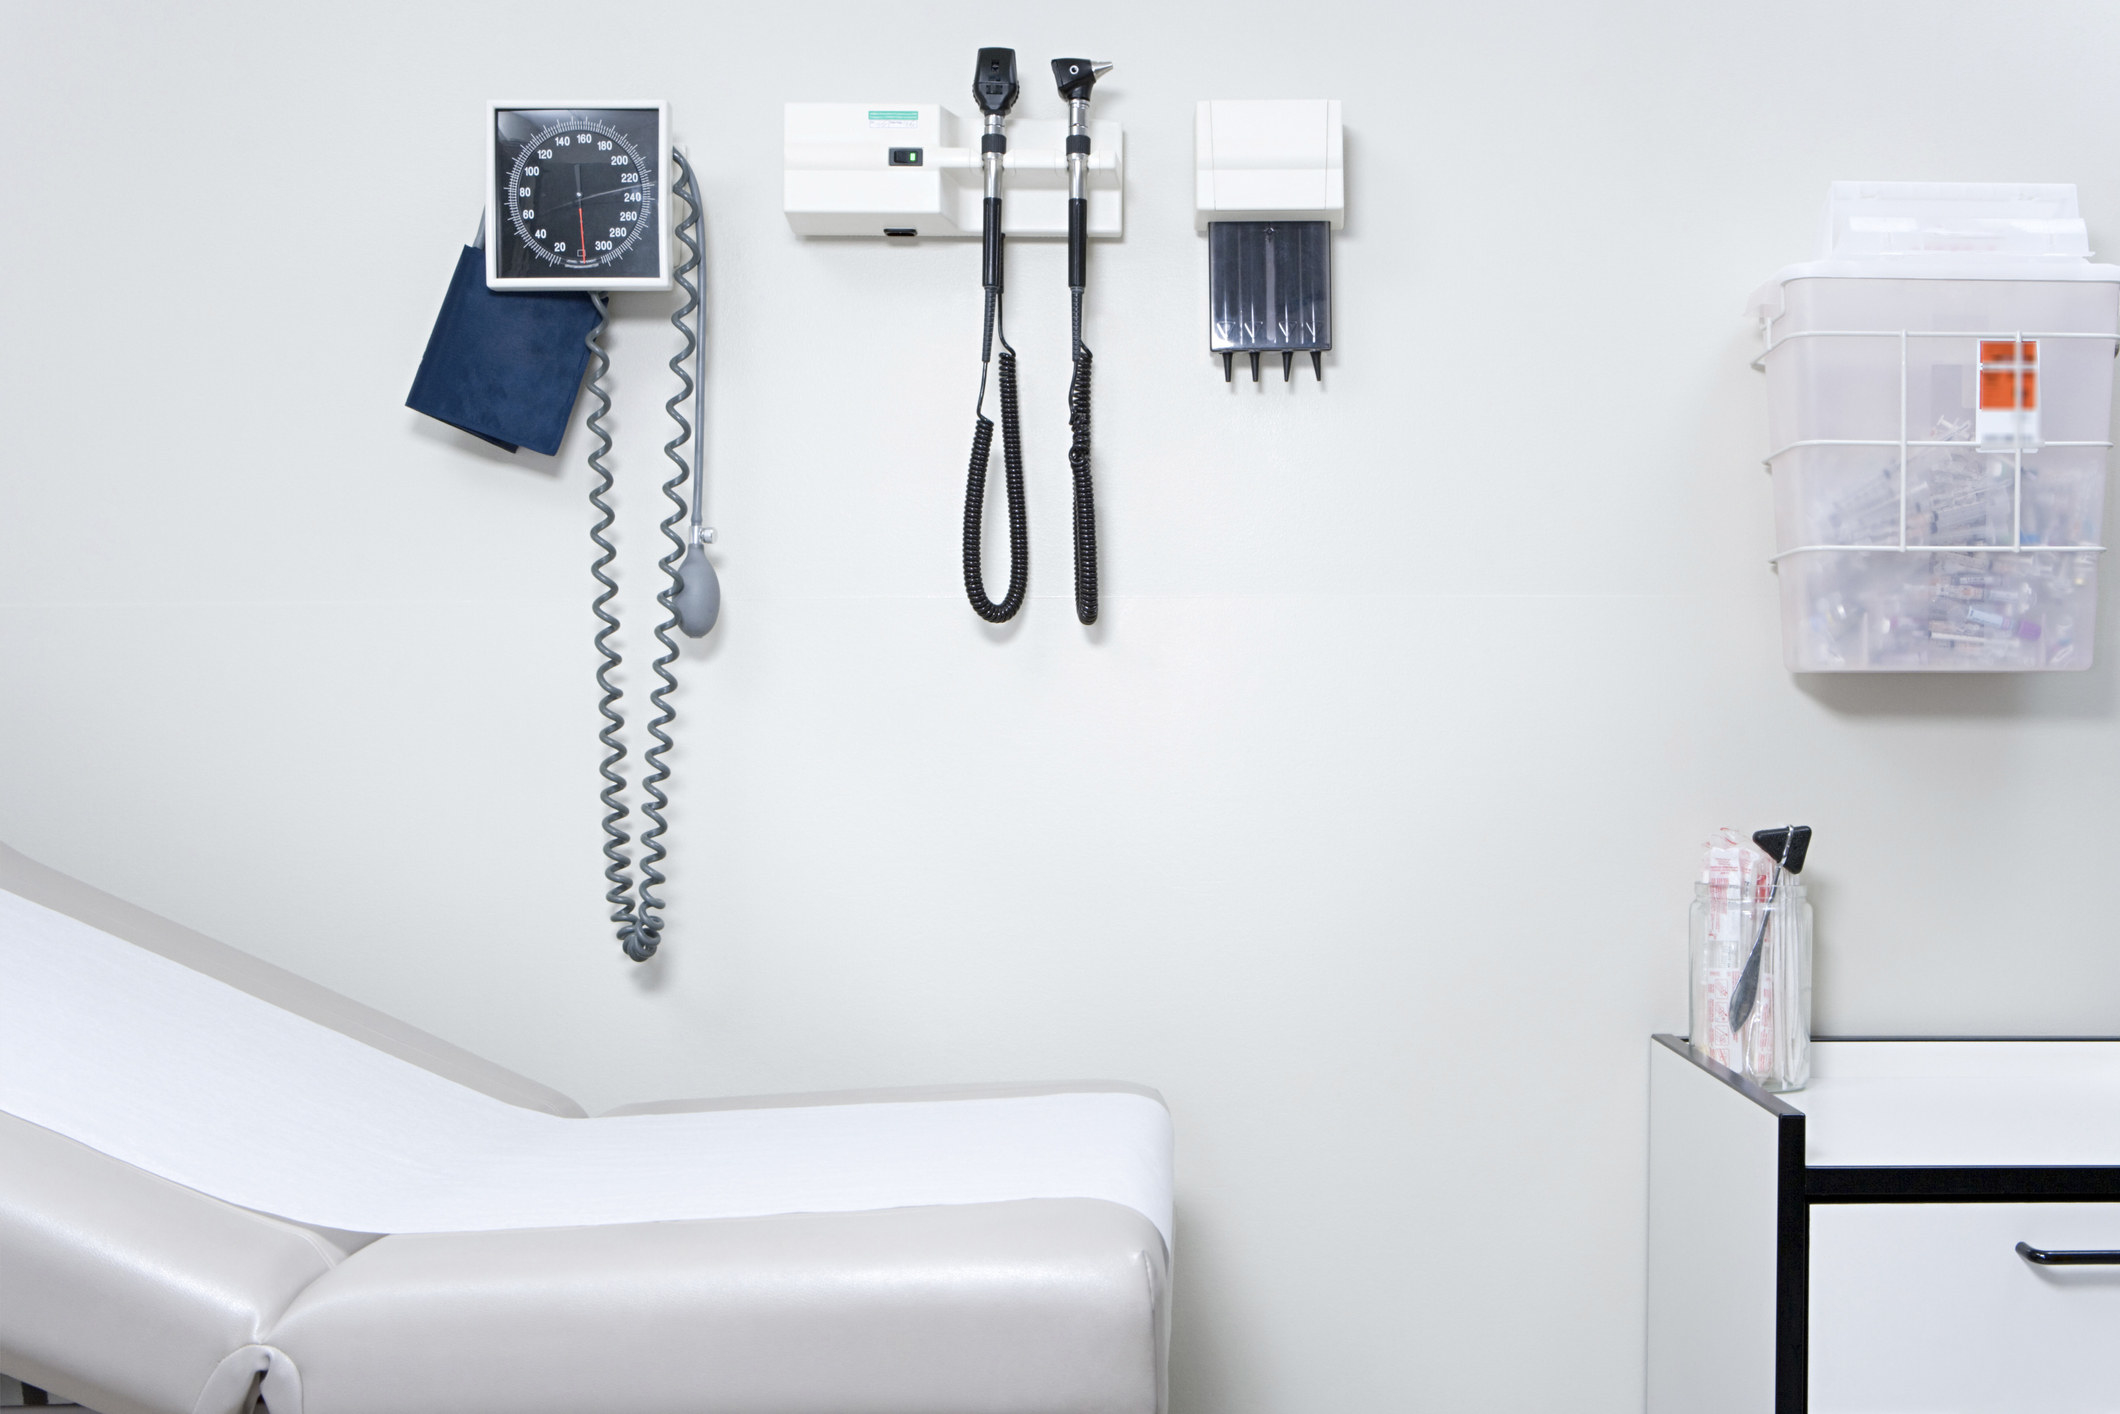 A stock image of the inside of a doctor&#x27;s office with tools like a blood pressure machine attached to the walls